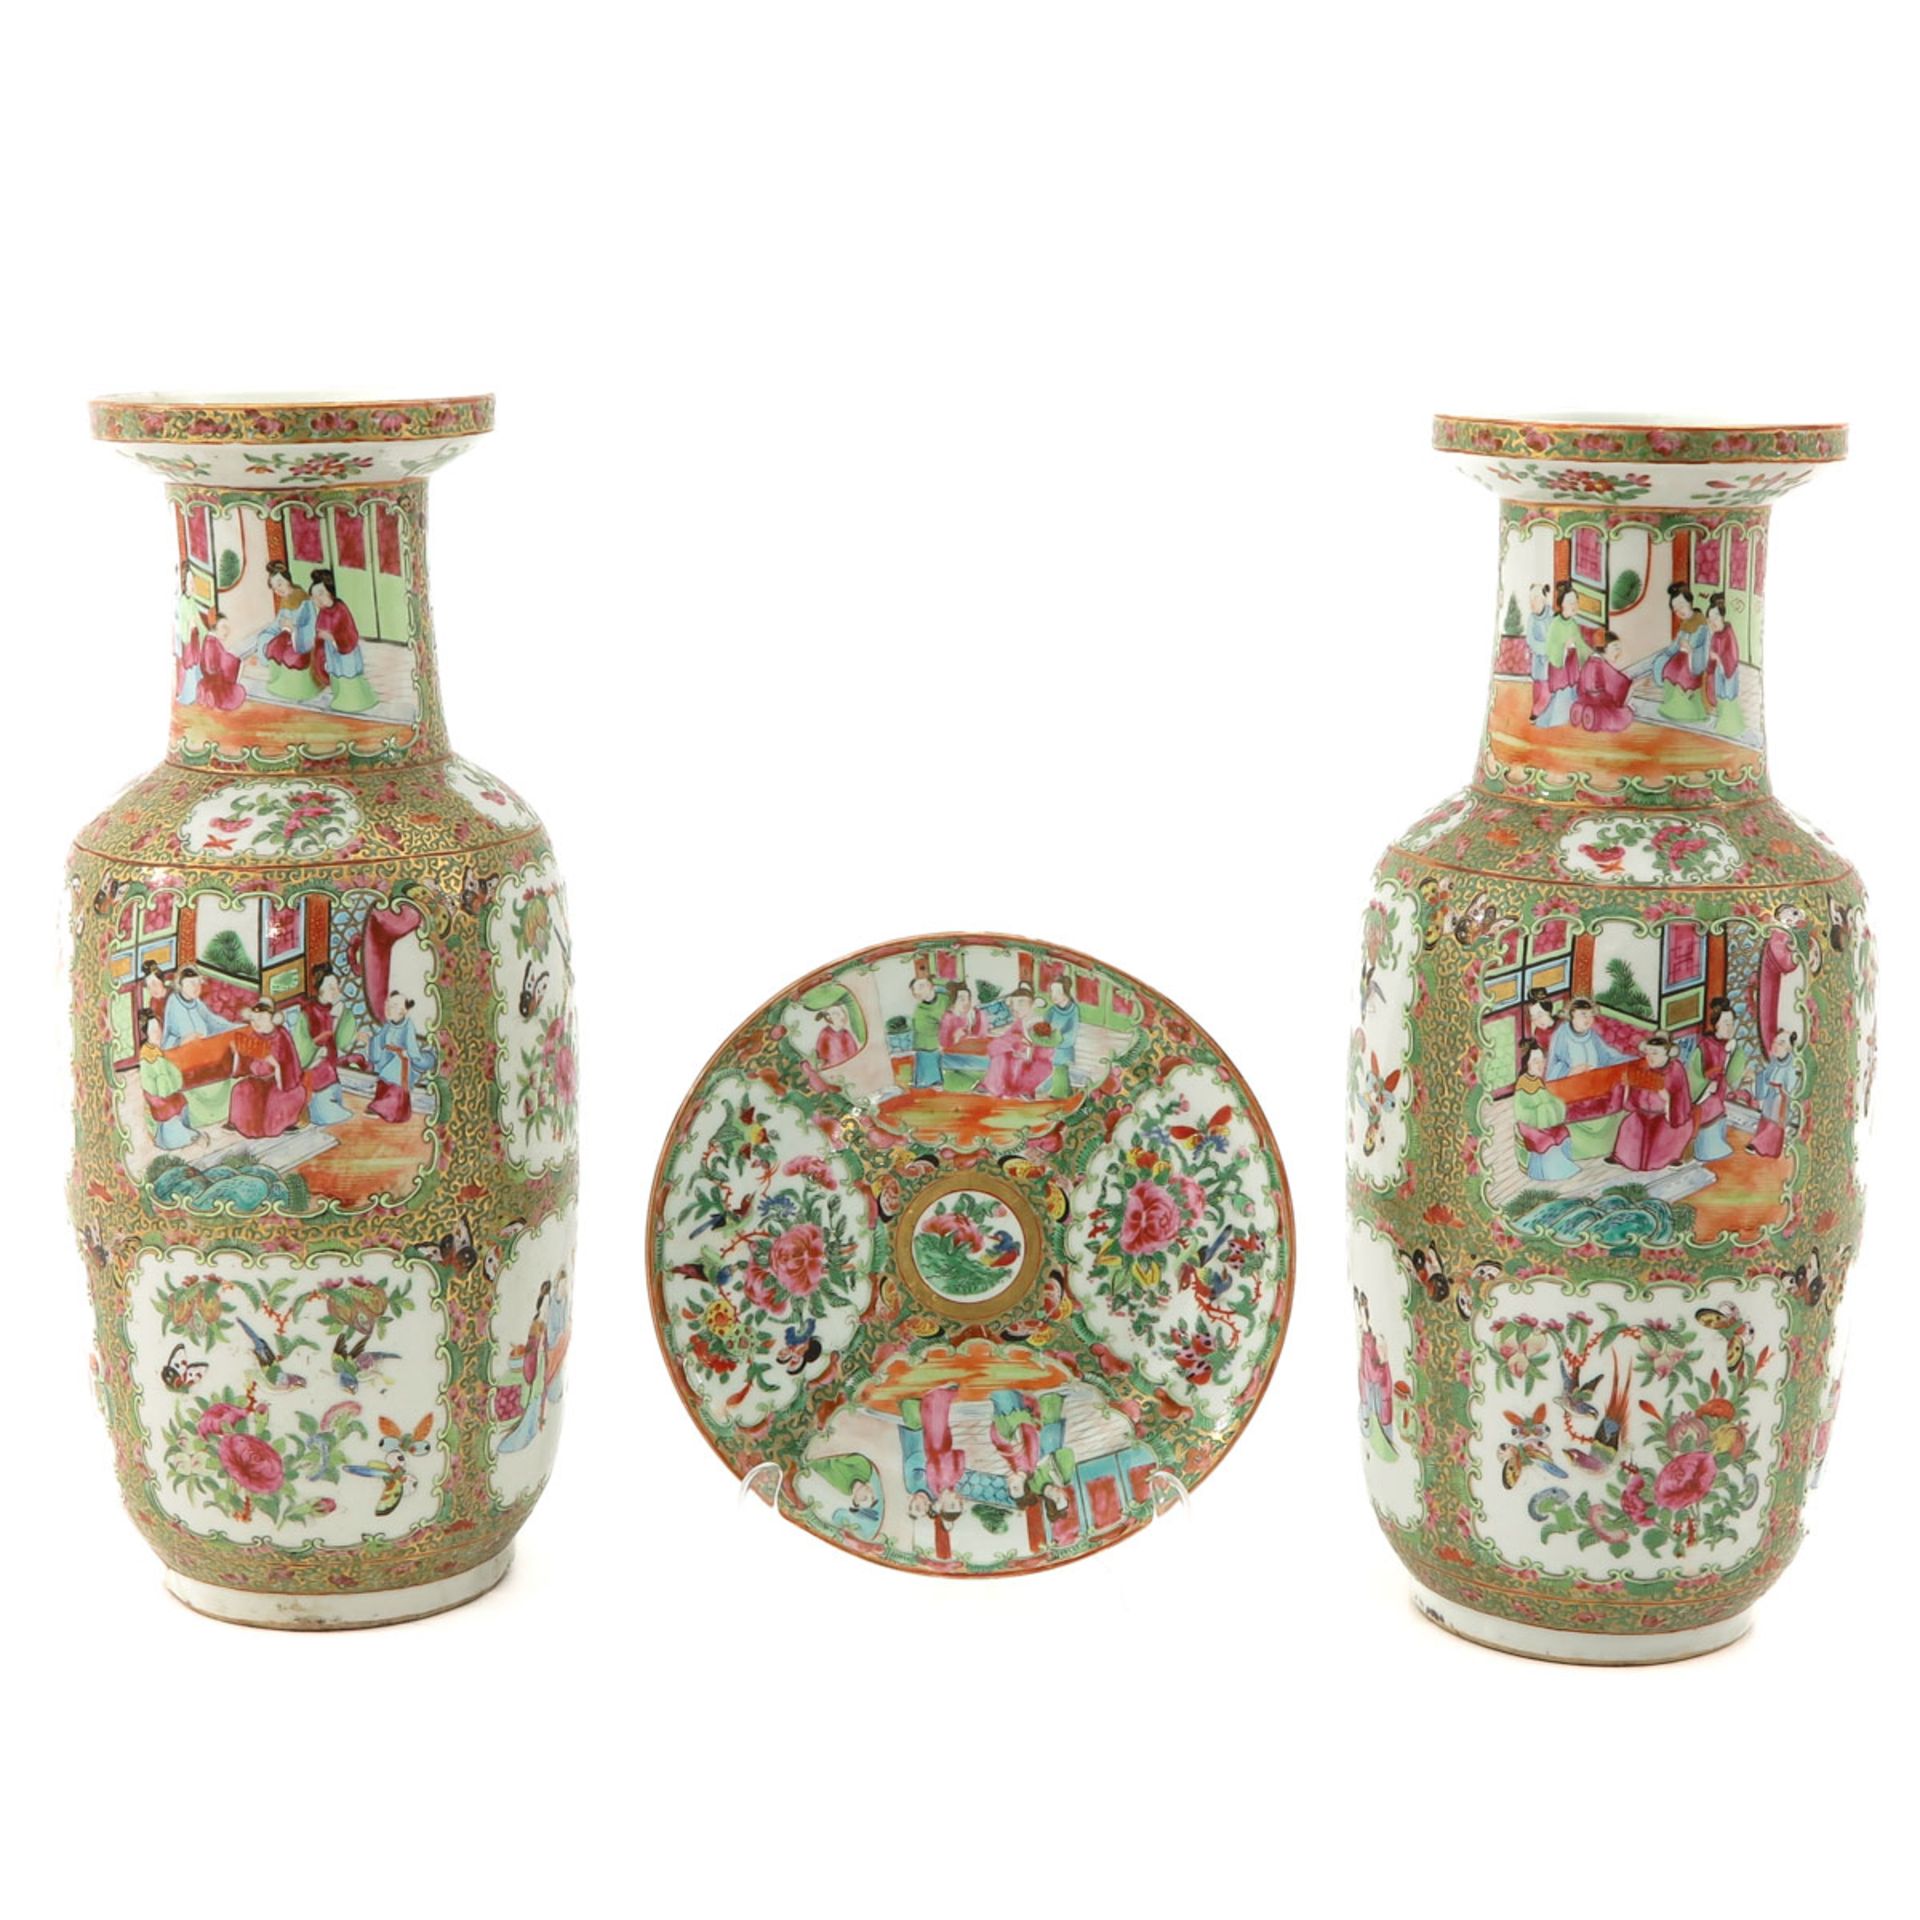 A Cantonese Plate and Pair of Vases